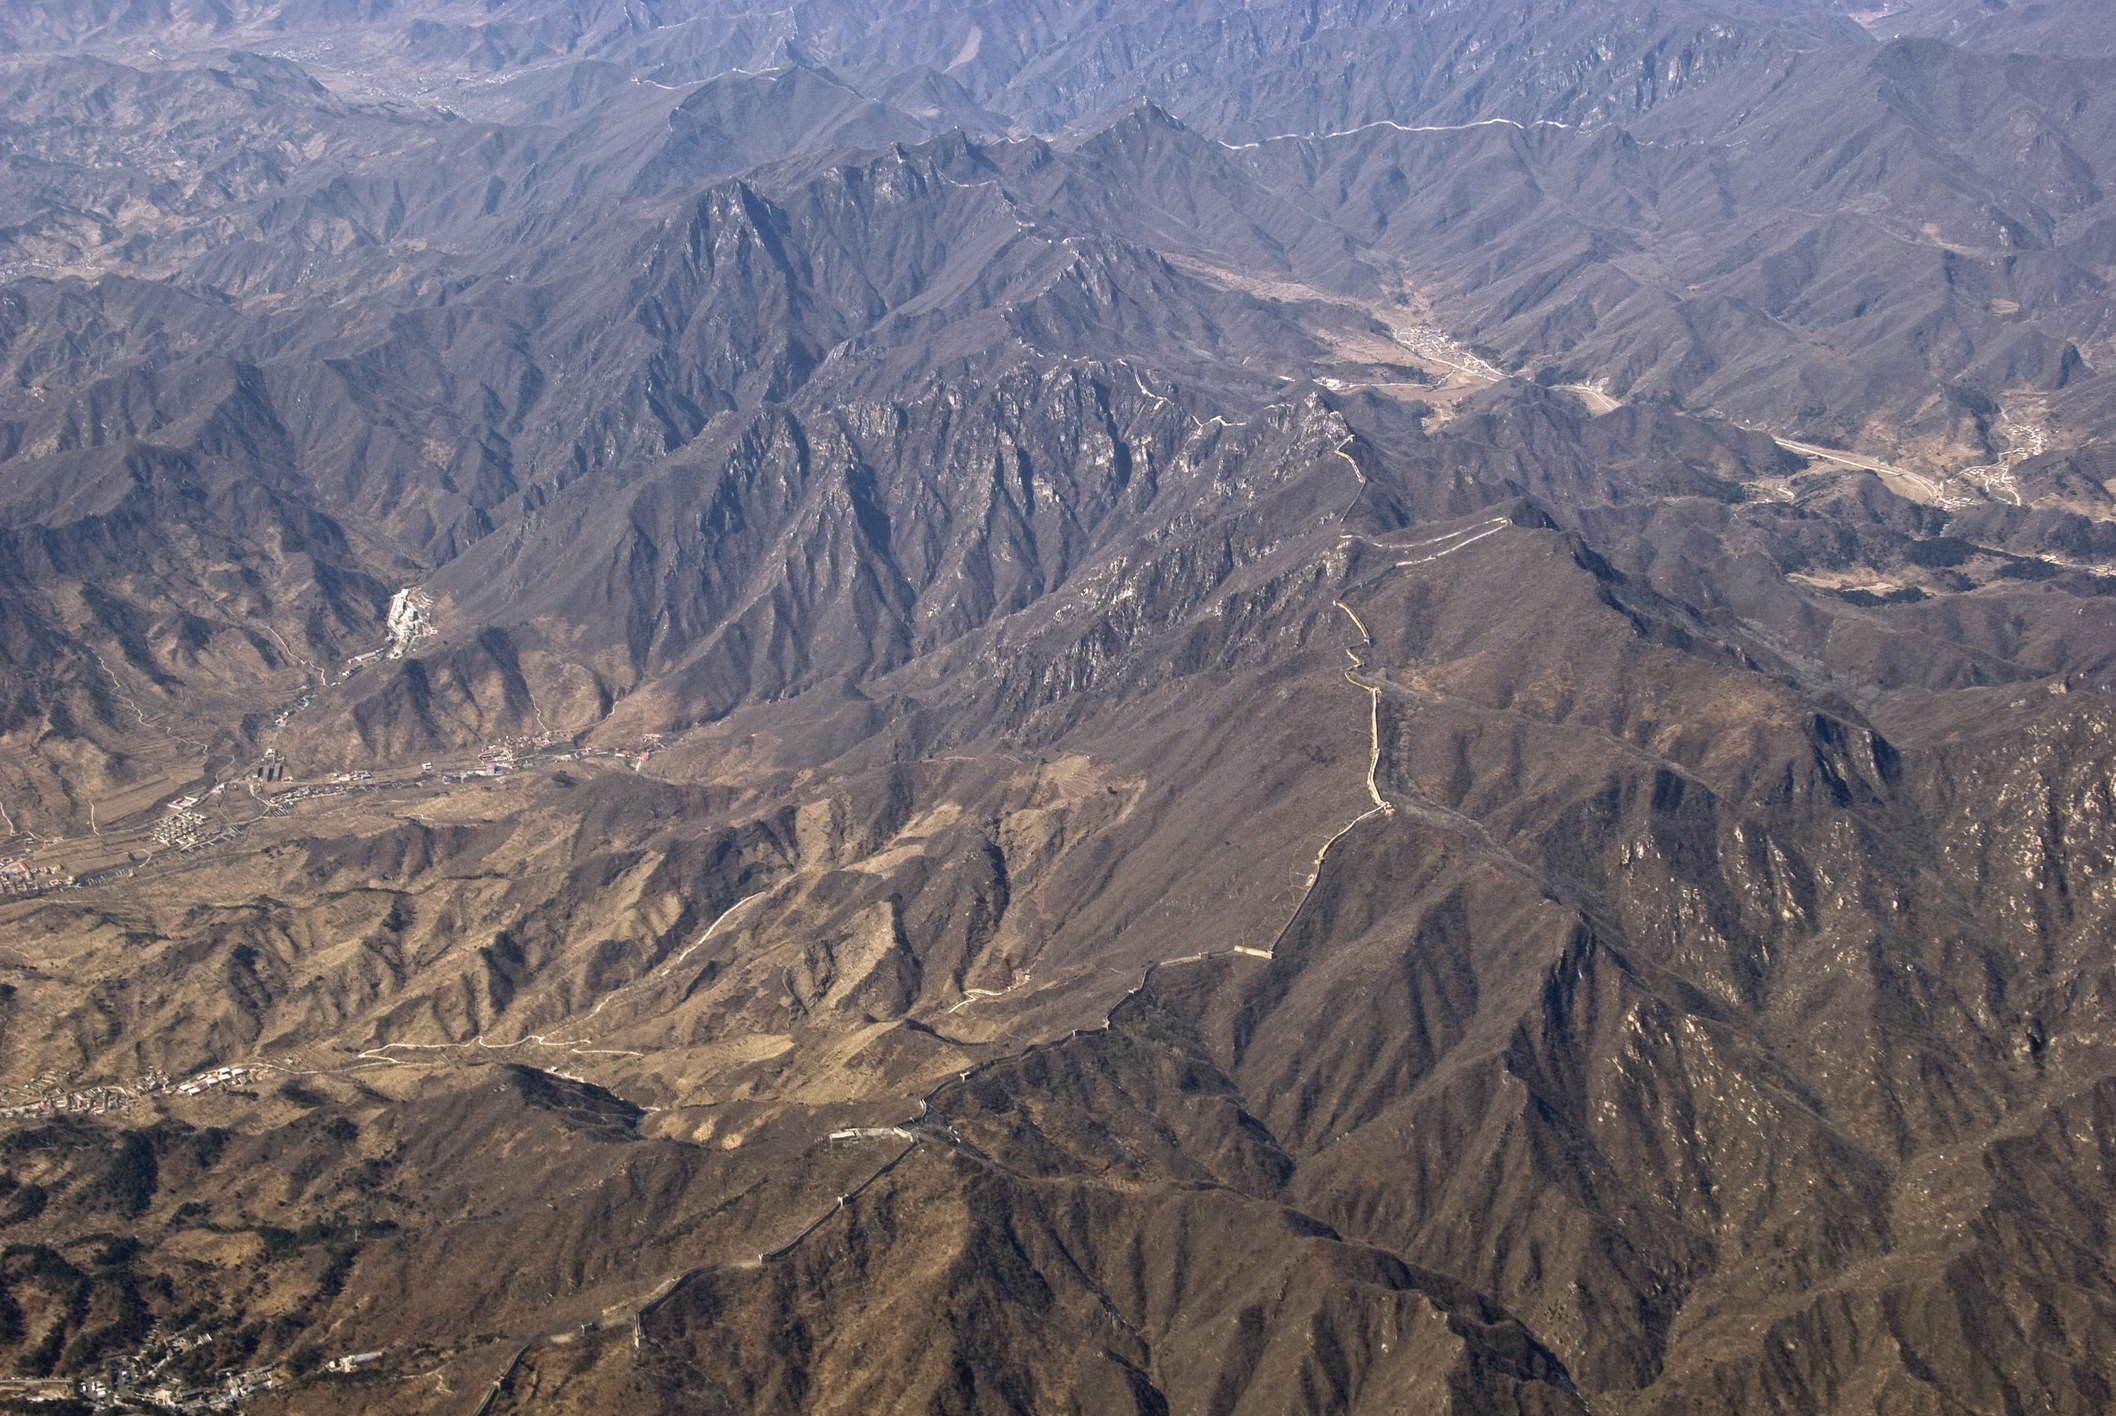 An aerial view of the Great Wall of China